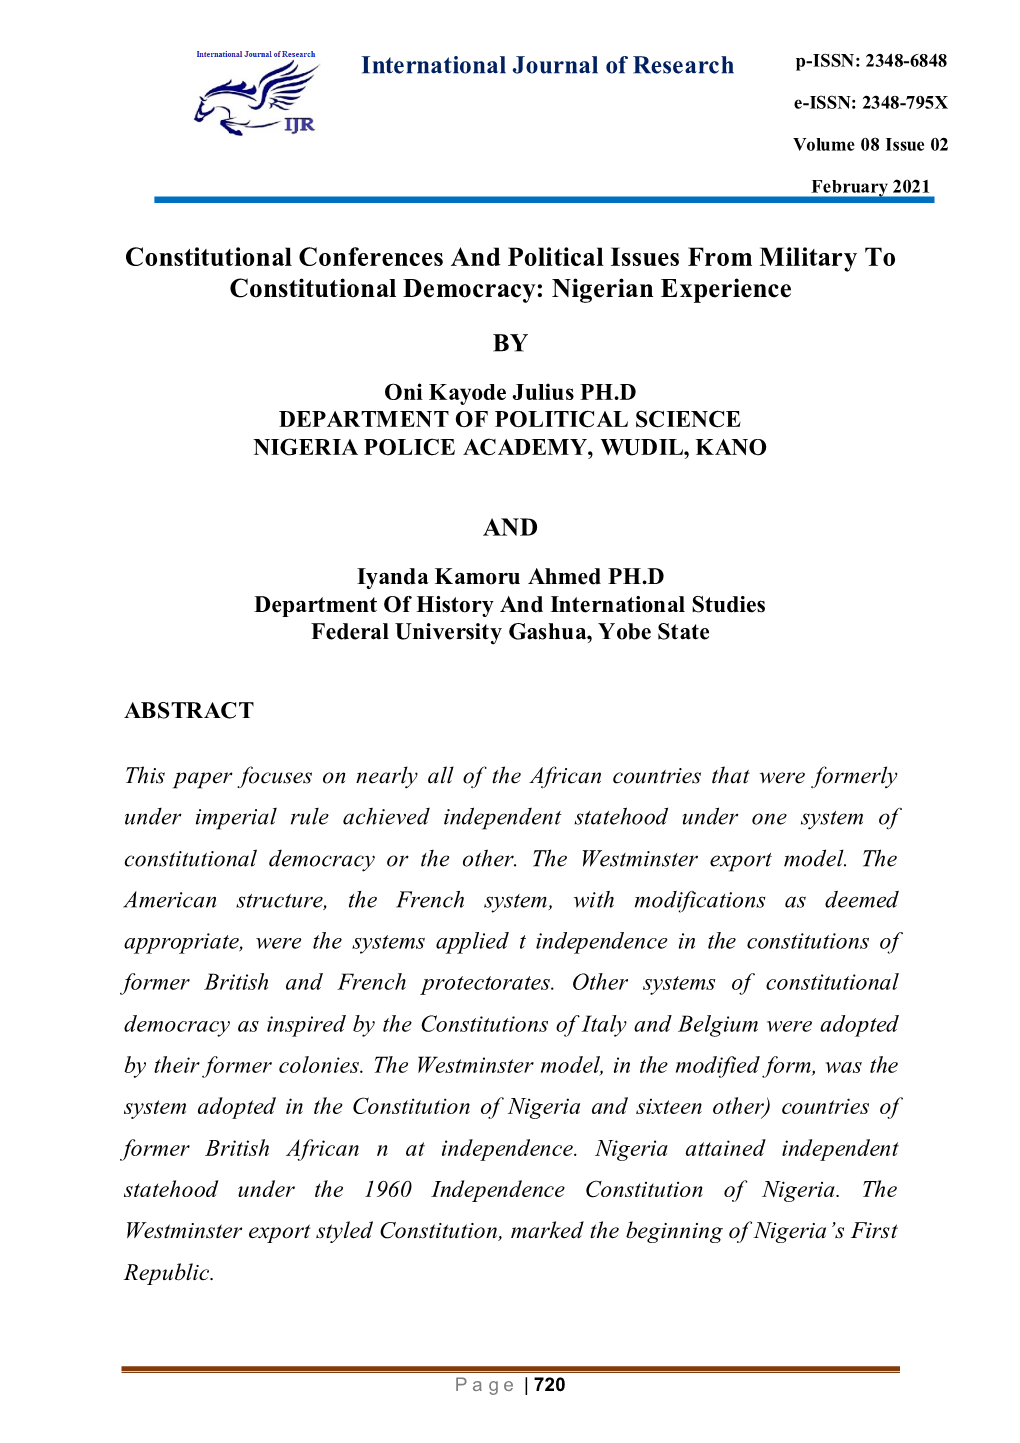 Constitutional Conferences and Political Issues from Military to Constitutional Democracy: Nigerian Experience